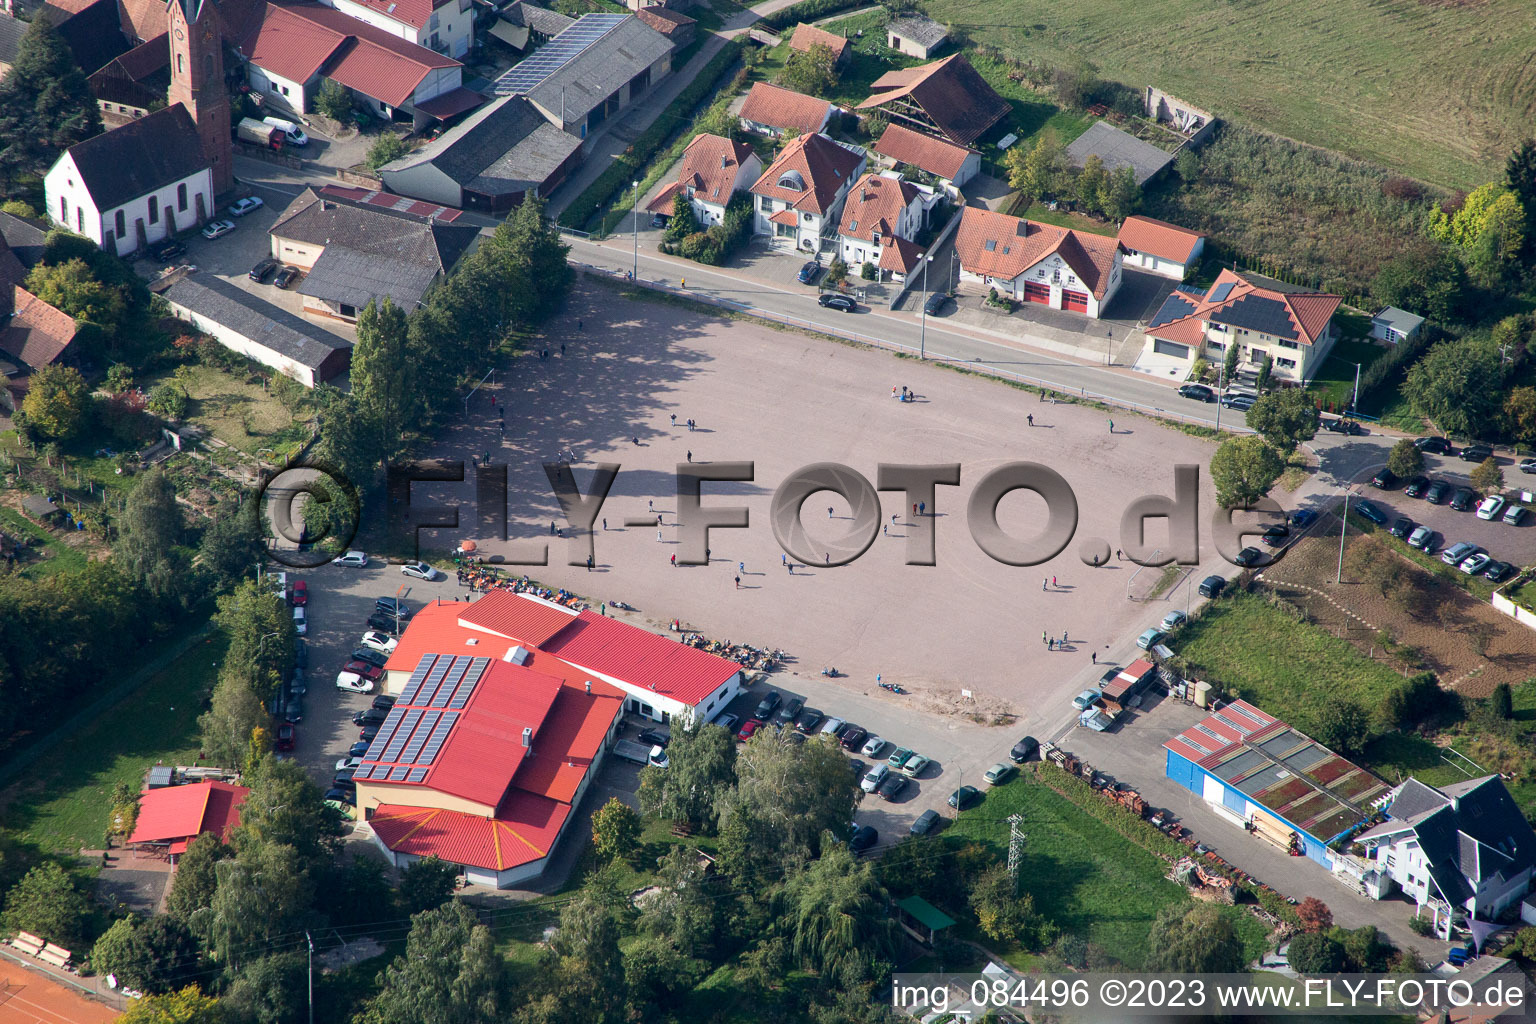 Aerial photograpy of Fairground in the district Drusweiler in Kapellen-Drusweiler in the state Rhineland-Palatinate, Germany